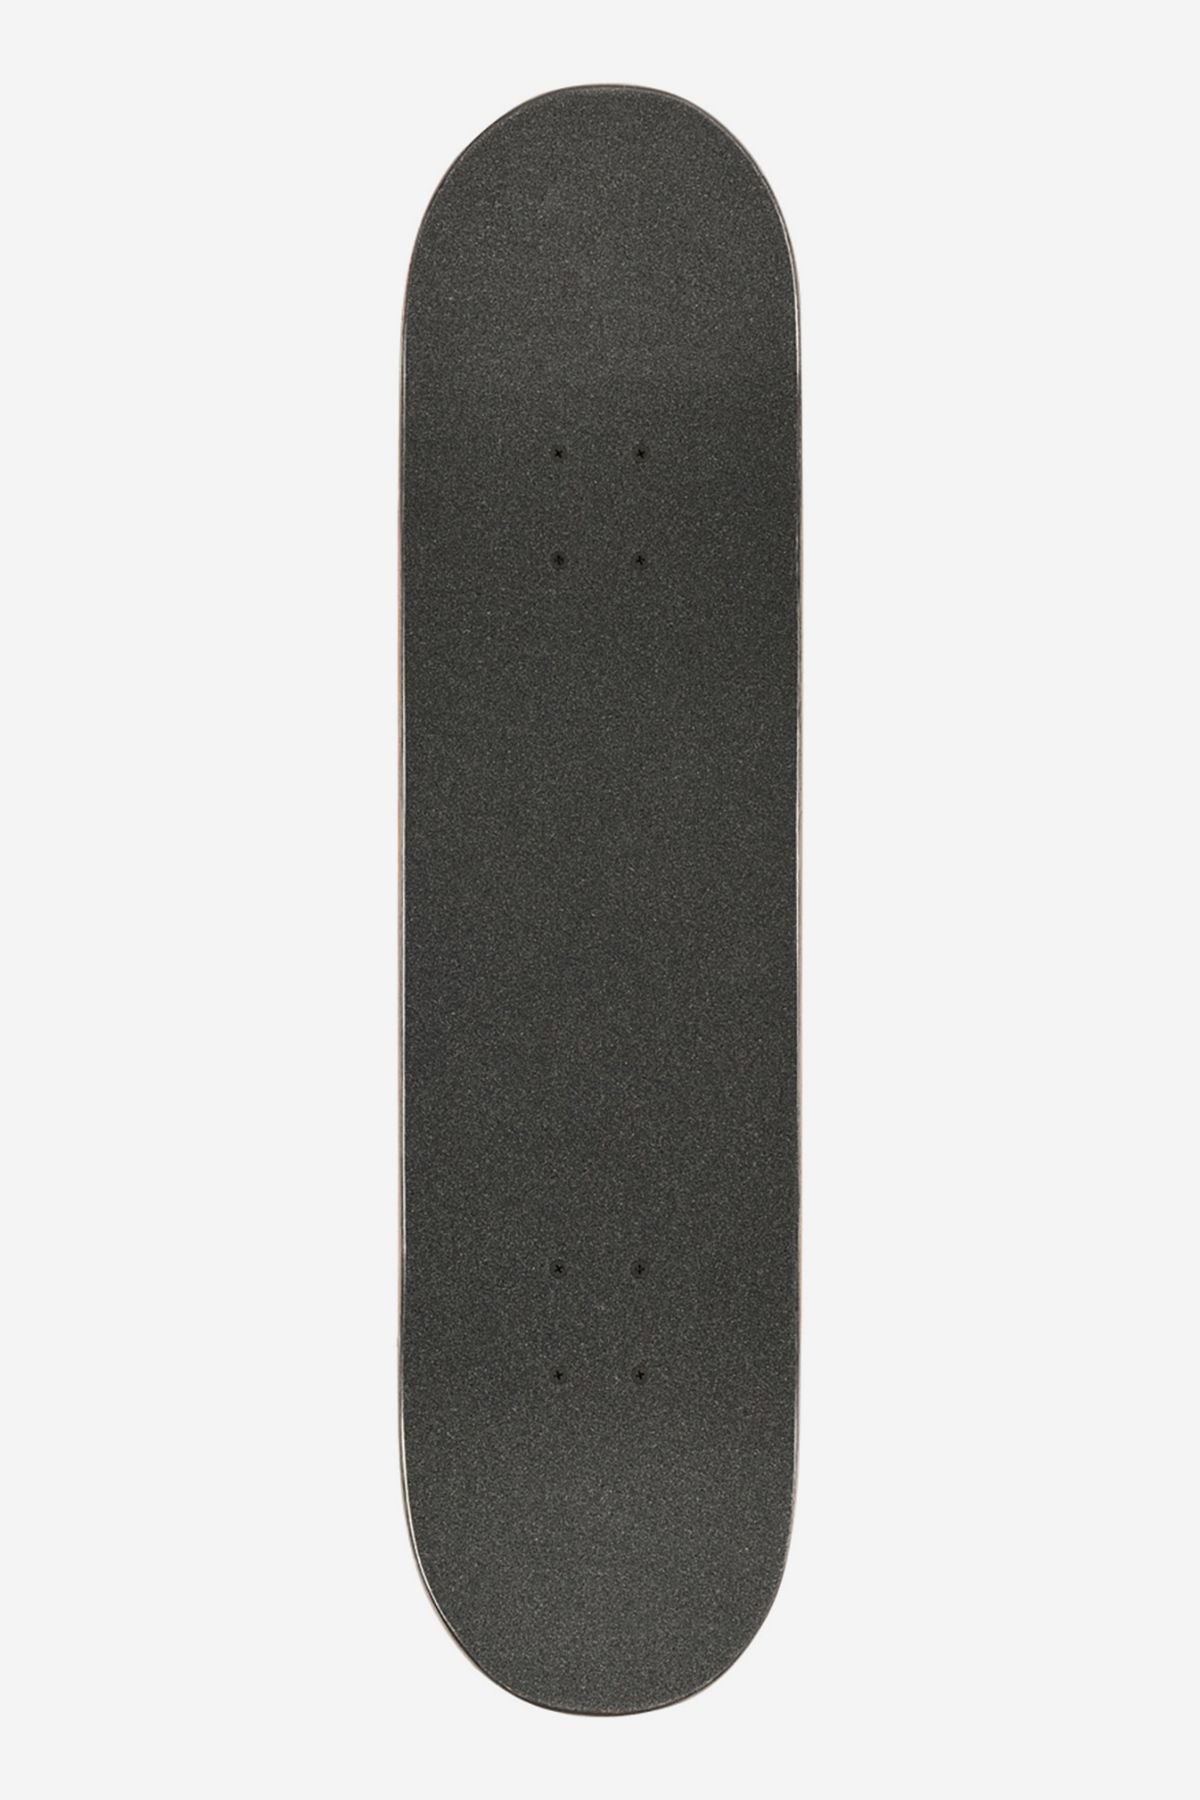 grip tape of Goodstock 8.0" Complete - Off White